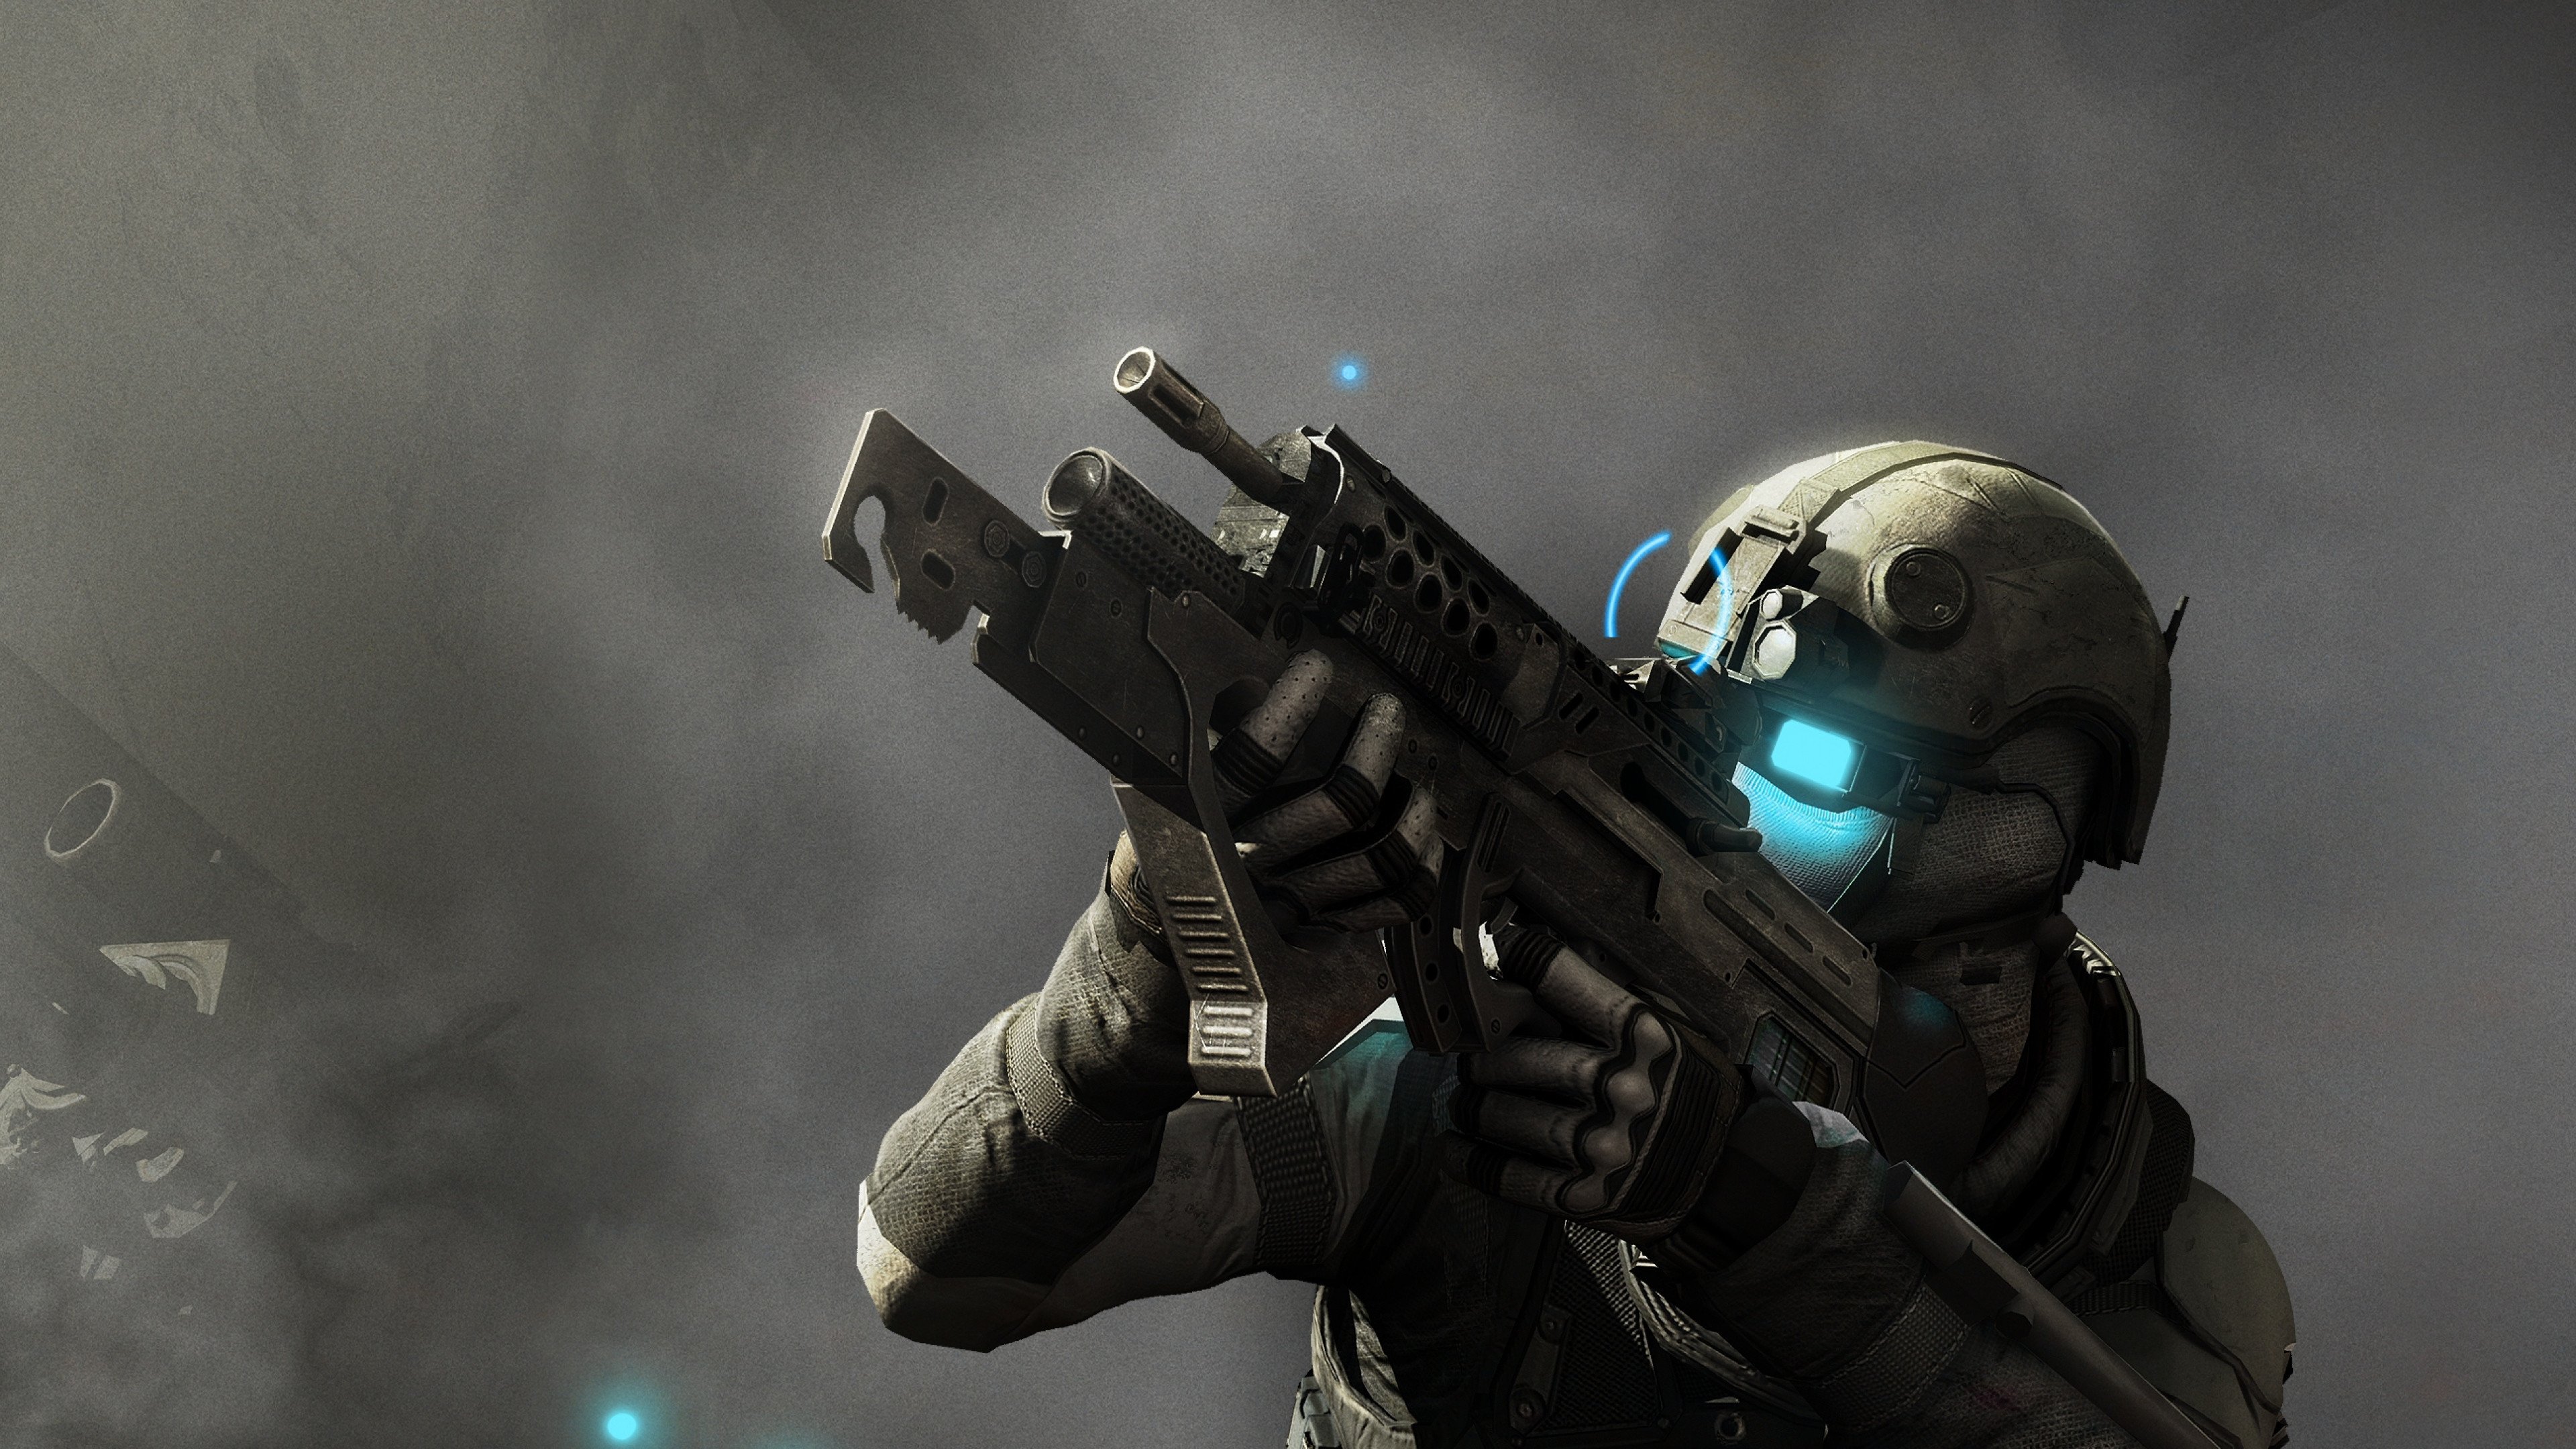 3840x2160  Wallpaper tom clancys ghost recon future soldier, soldiers,  machine, explosion, dust